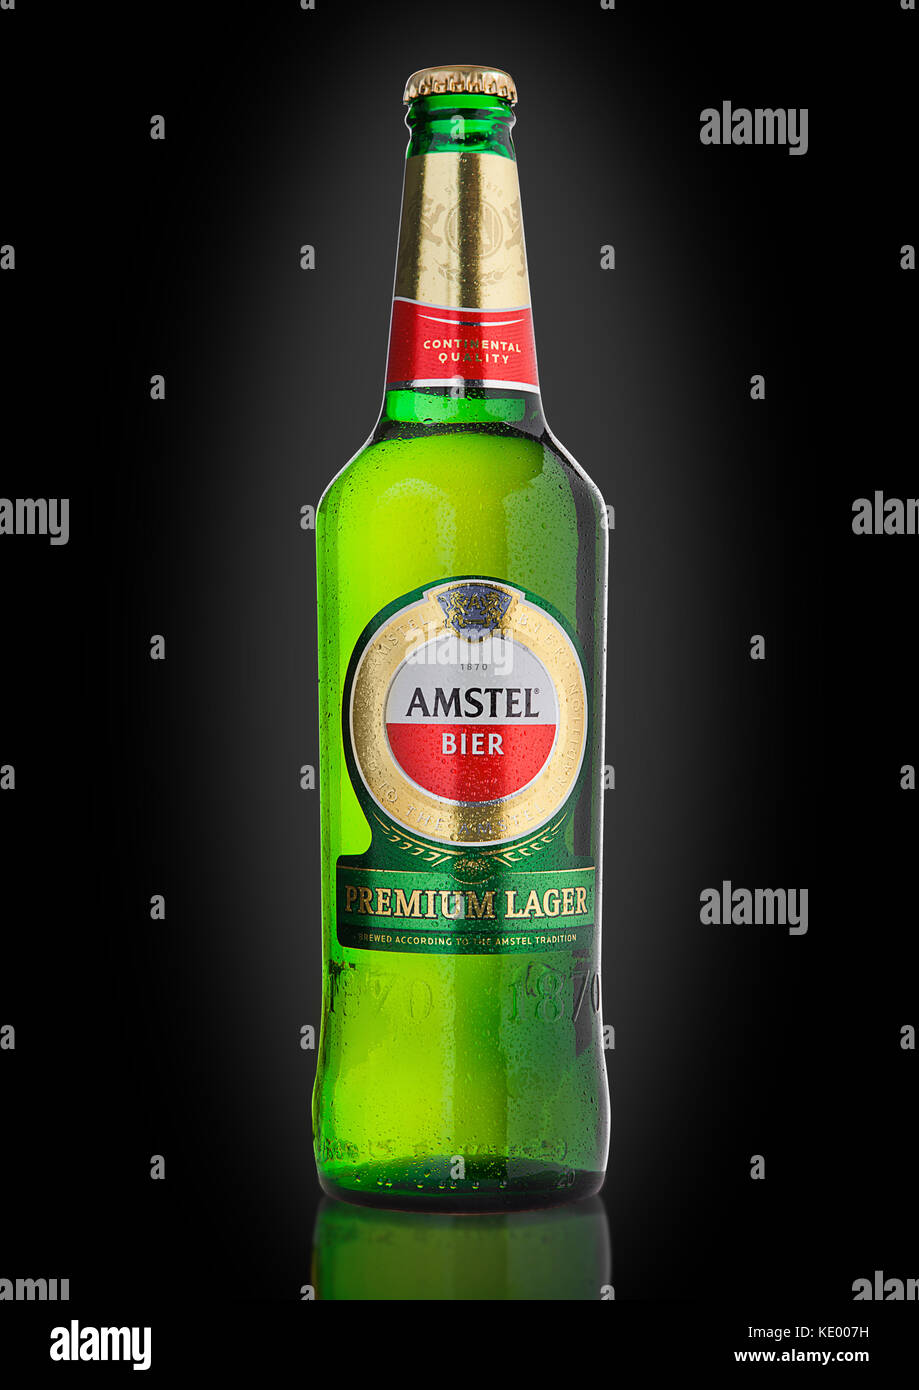 LONDON, UNITED KINGDOM - NOVEMBER 01, 2016: Cold bottle of Amstel Premium Lager on black background.Amstel is an internationally known brand of beer p Stock Photo